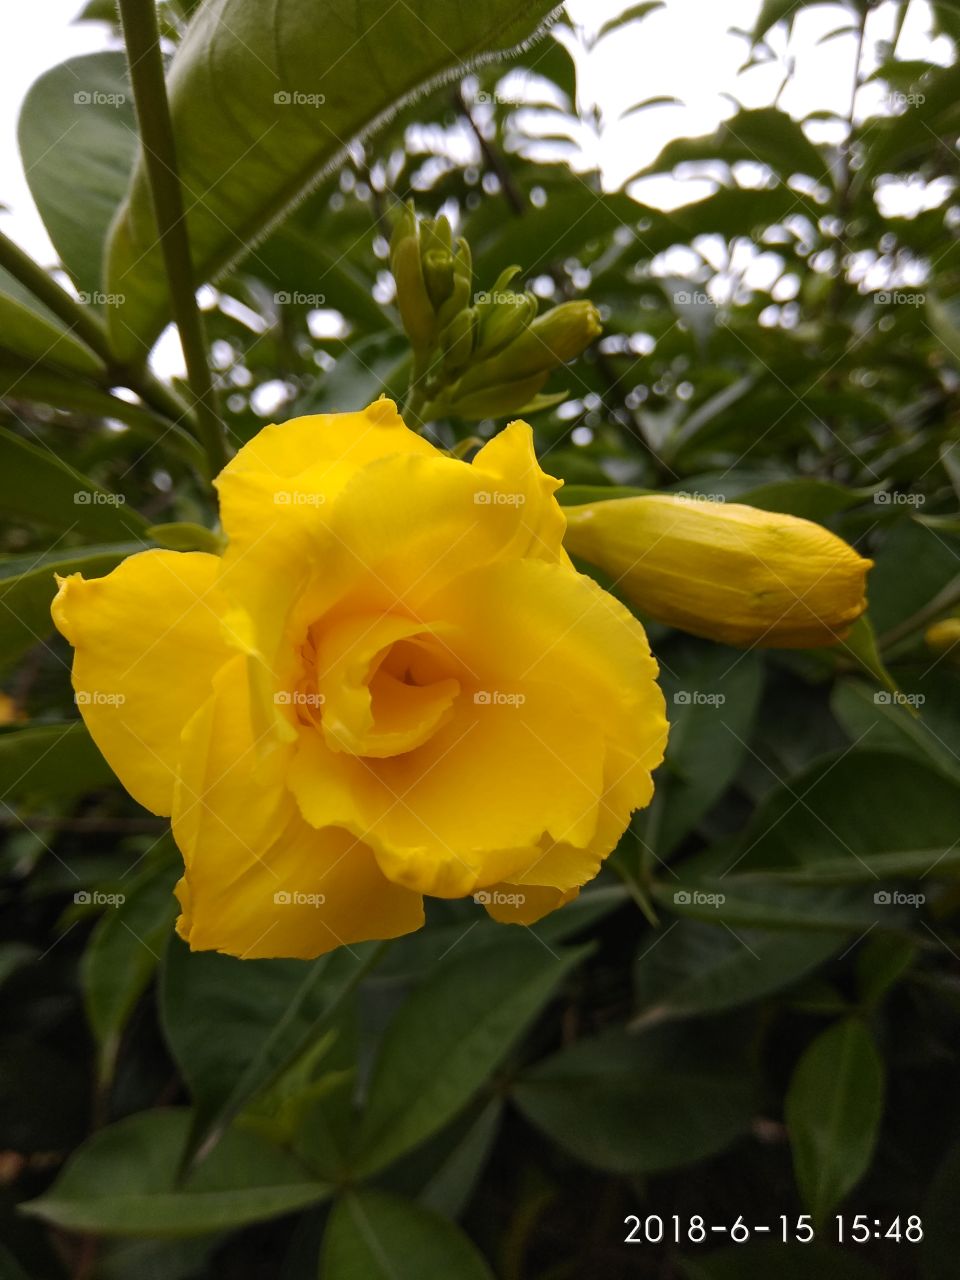 Fresh flowers blooming in a wild, yellow texture, under green leaves